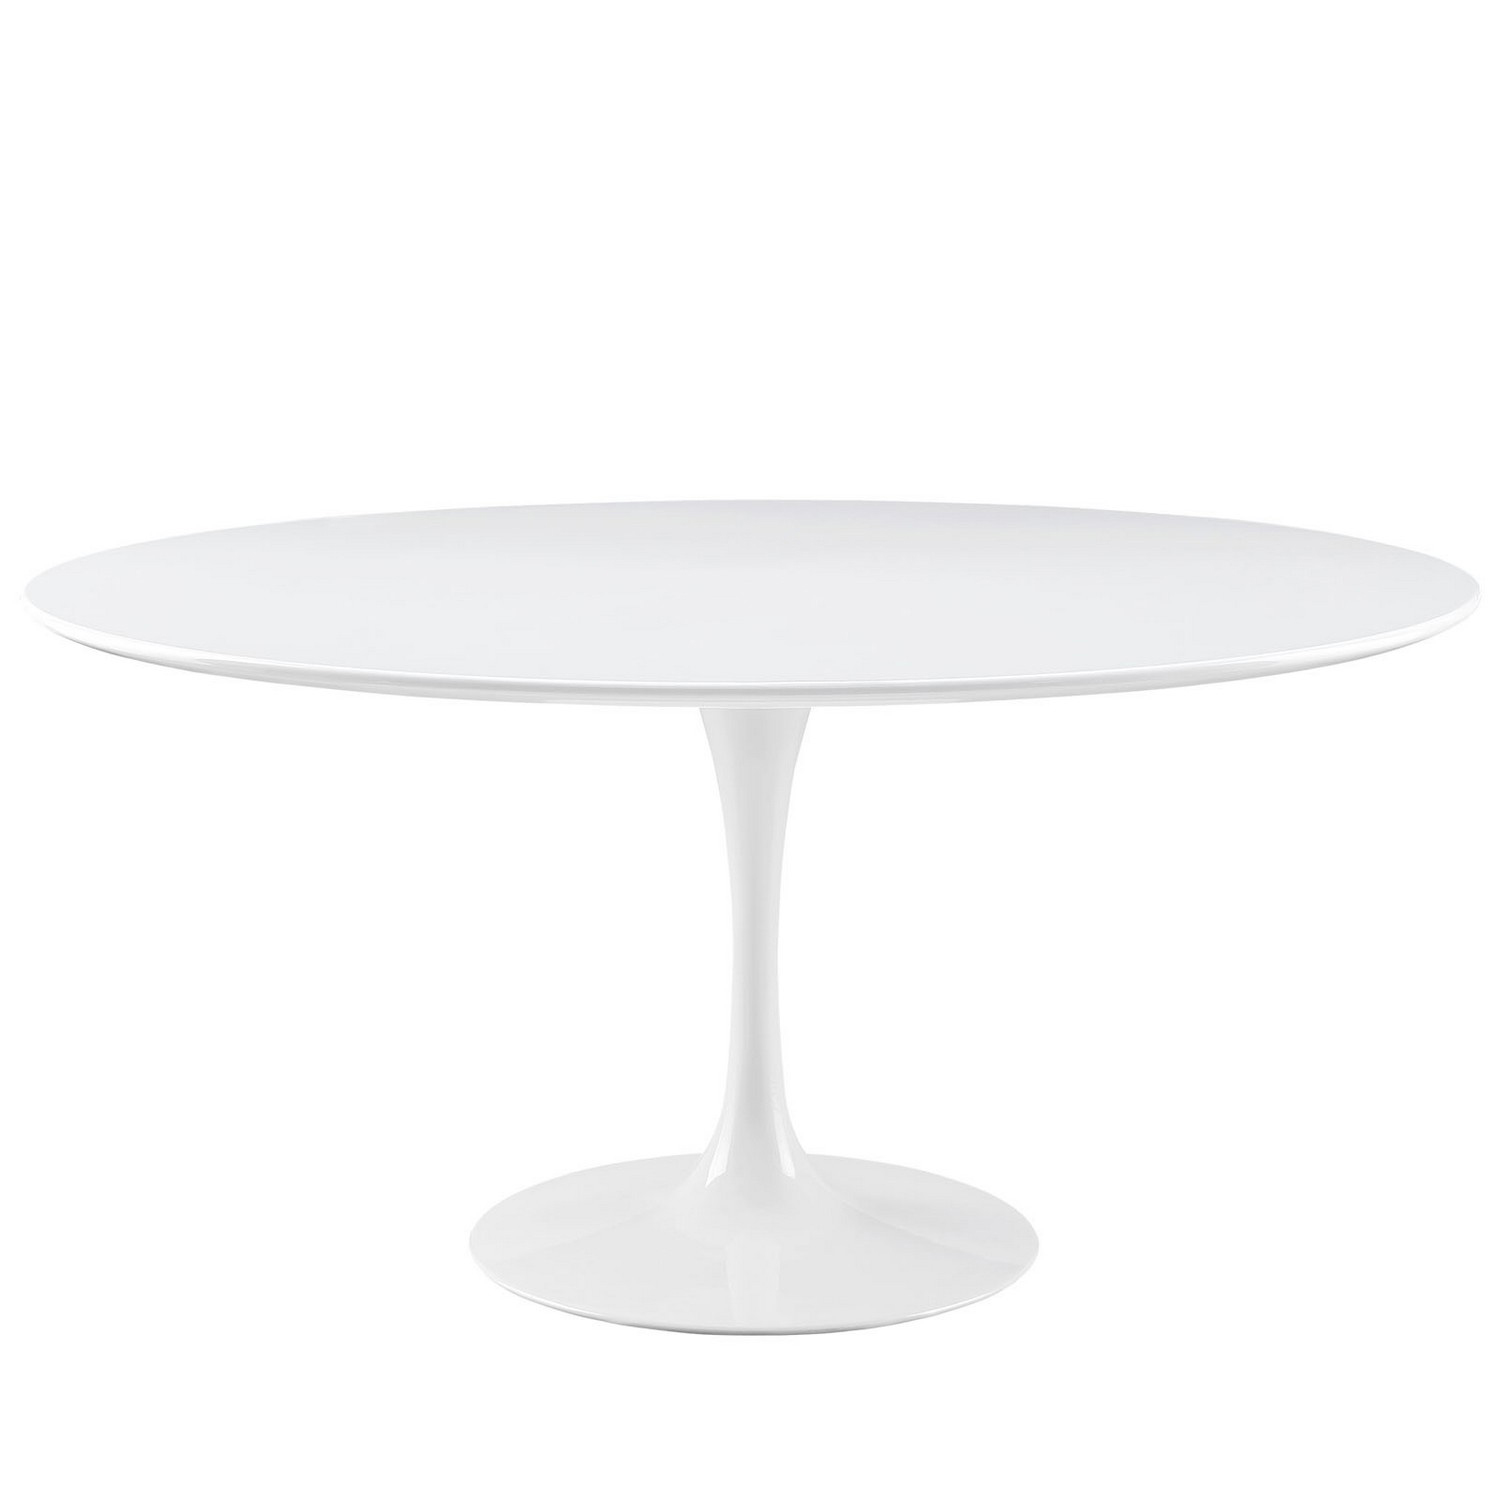 Modway Lippa 60 Wood Top Dining Table - White